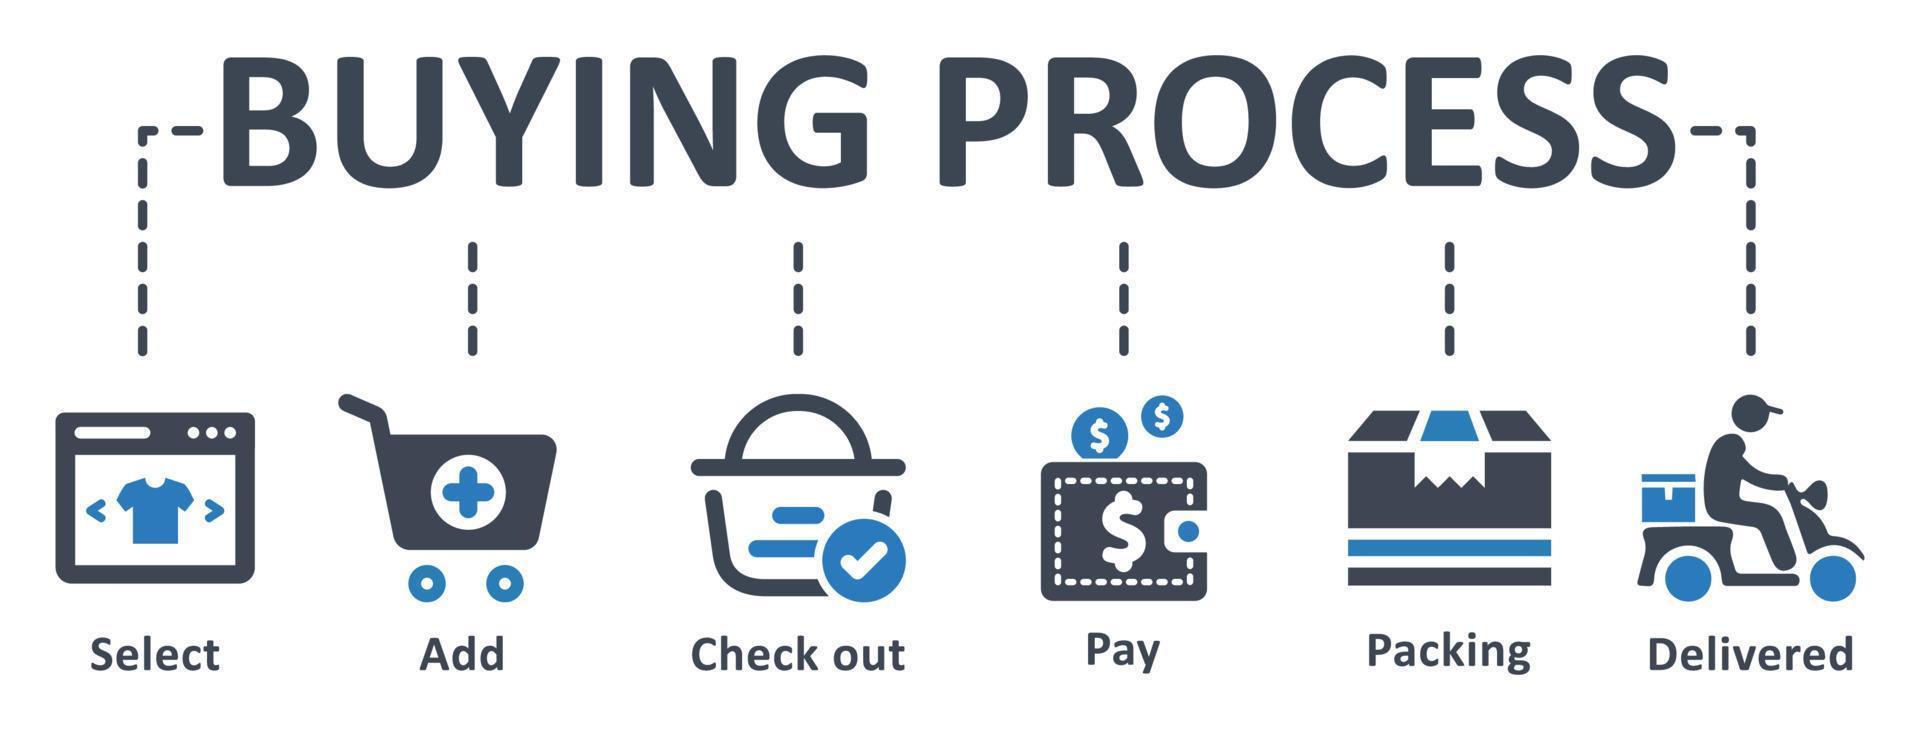 Buying Process icon - vector illustration . buying, process, select, add, check out, pay, packing, shipping, infographic, template, presentation, concept, banner, pictogram, icon set, icons .